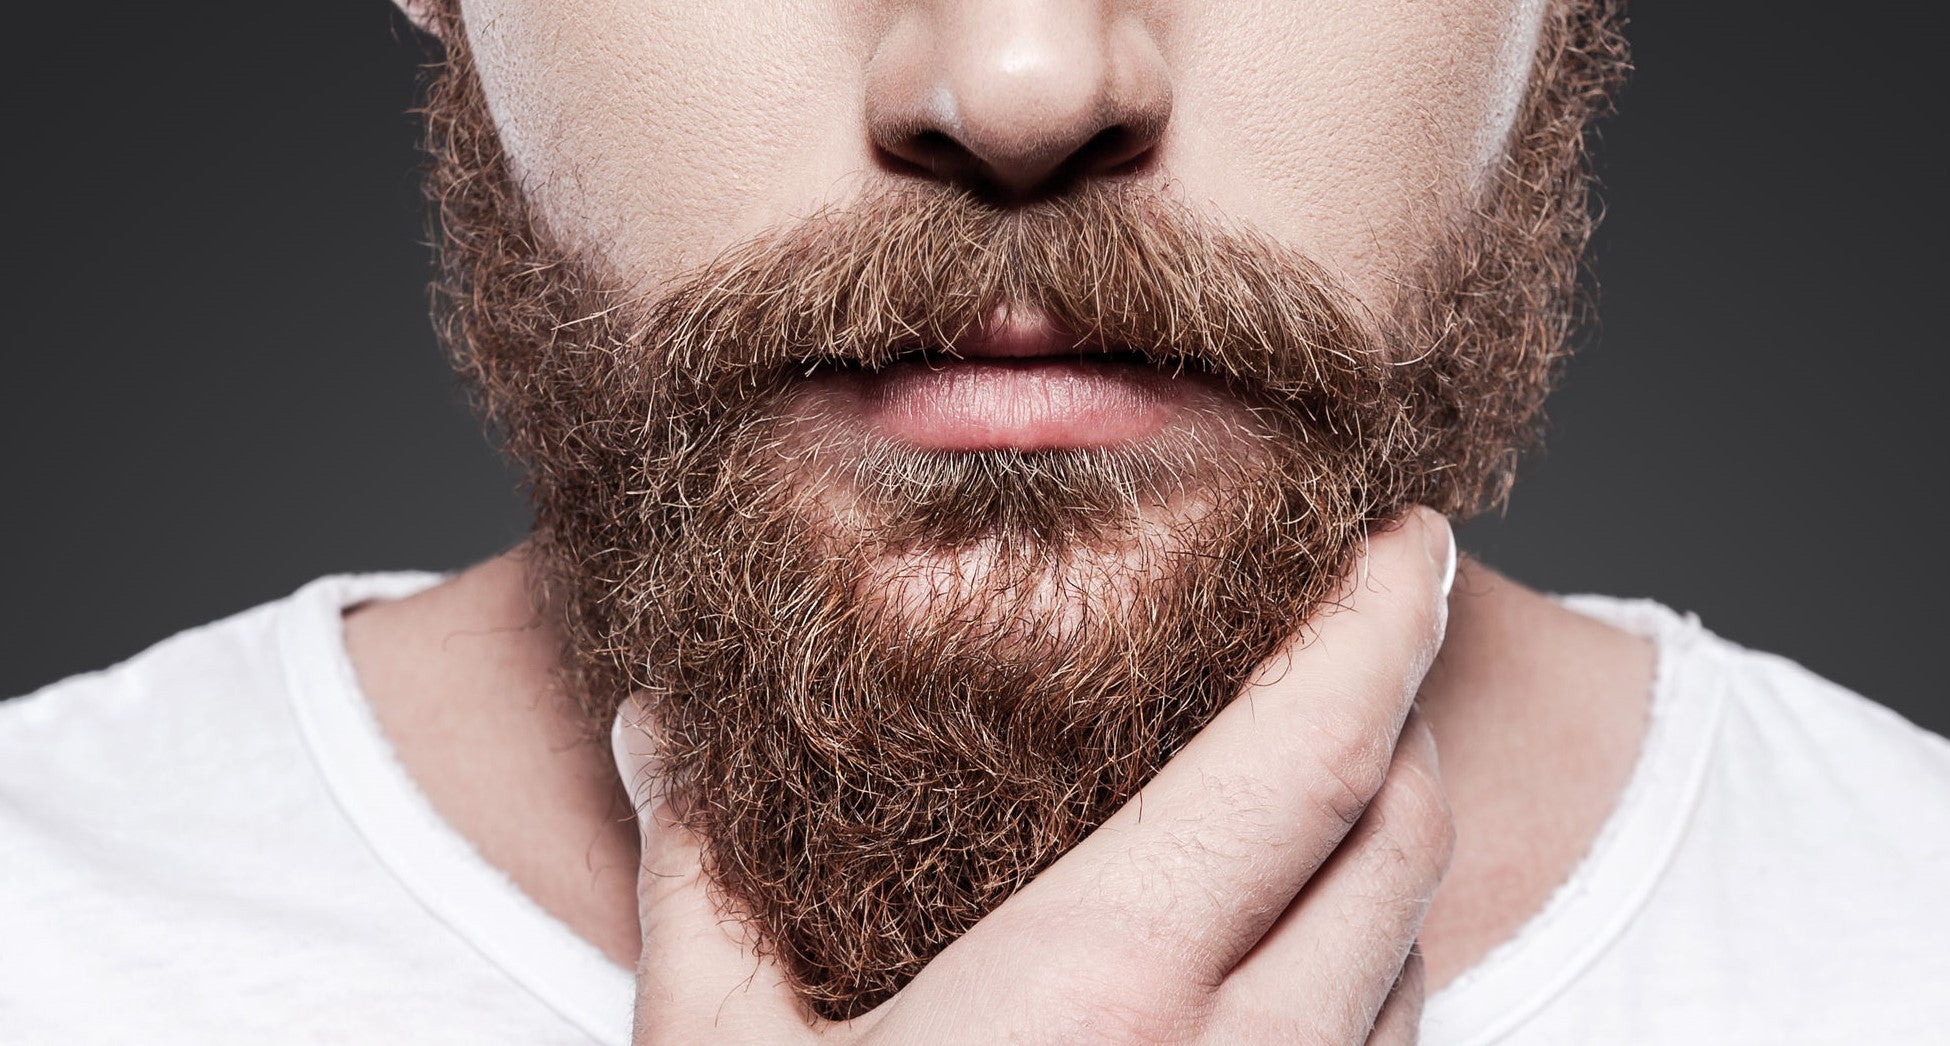 bad fashion trends - Dried out, untrimmed, long beards.